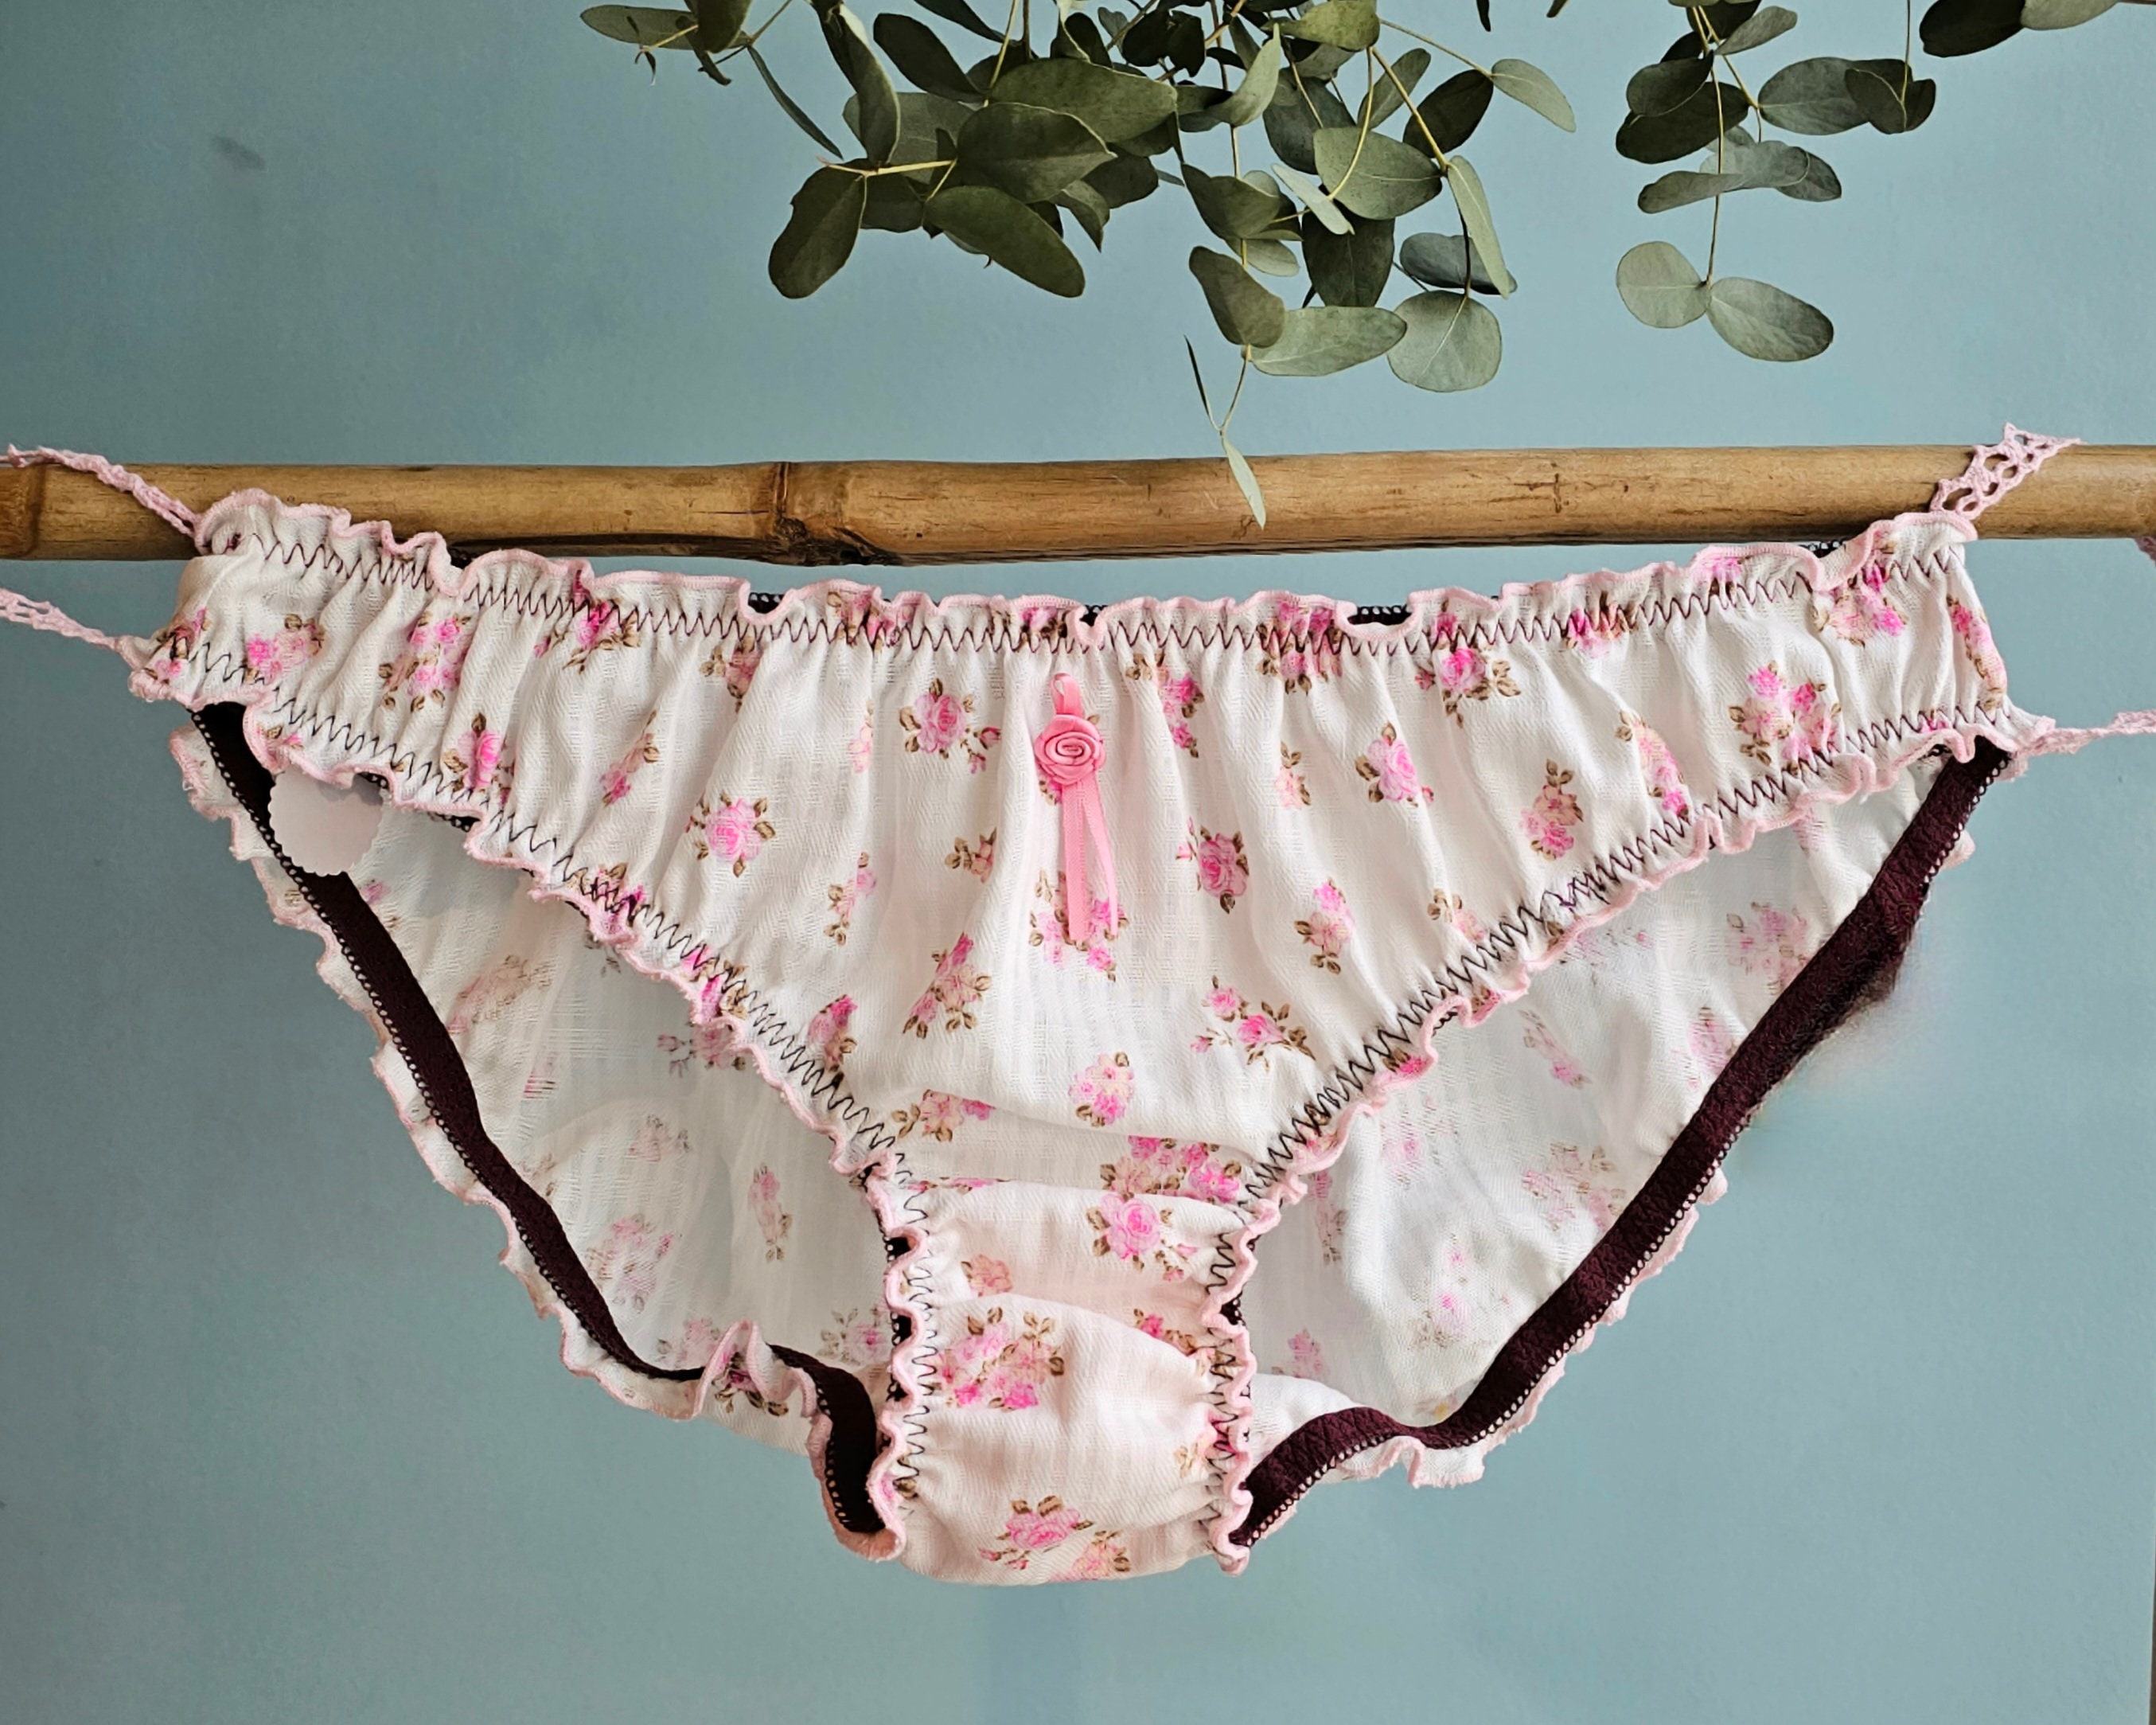 Free: BNWT VICTORIA'S SECRET PINK BRAND PANTIES UNDERWEAR - Other Women's  Clothing -  Auctions for Free Stuff